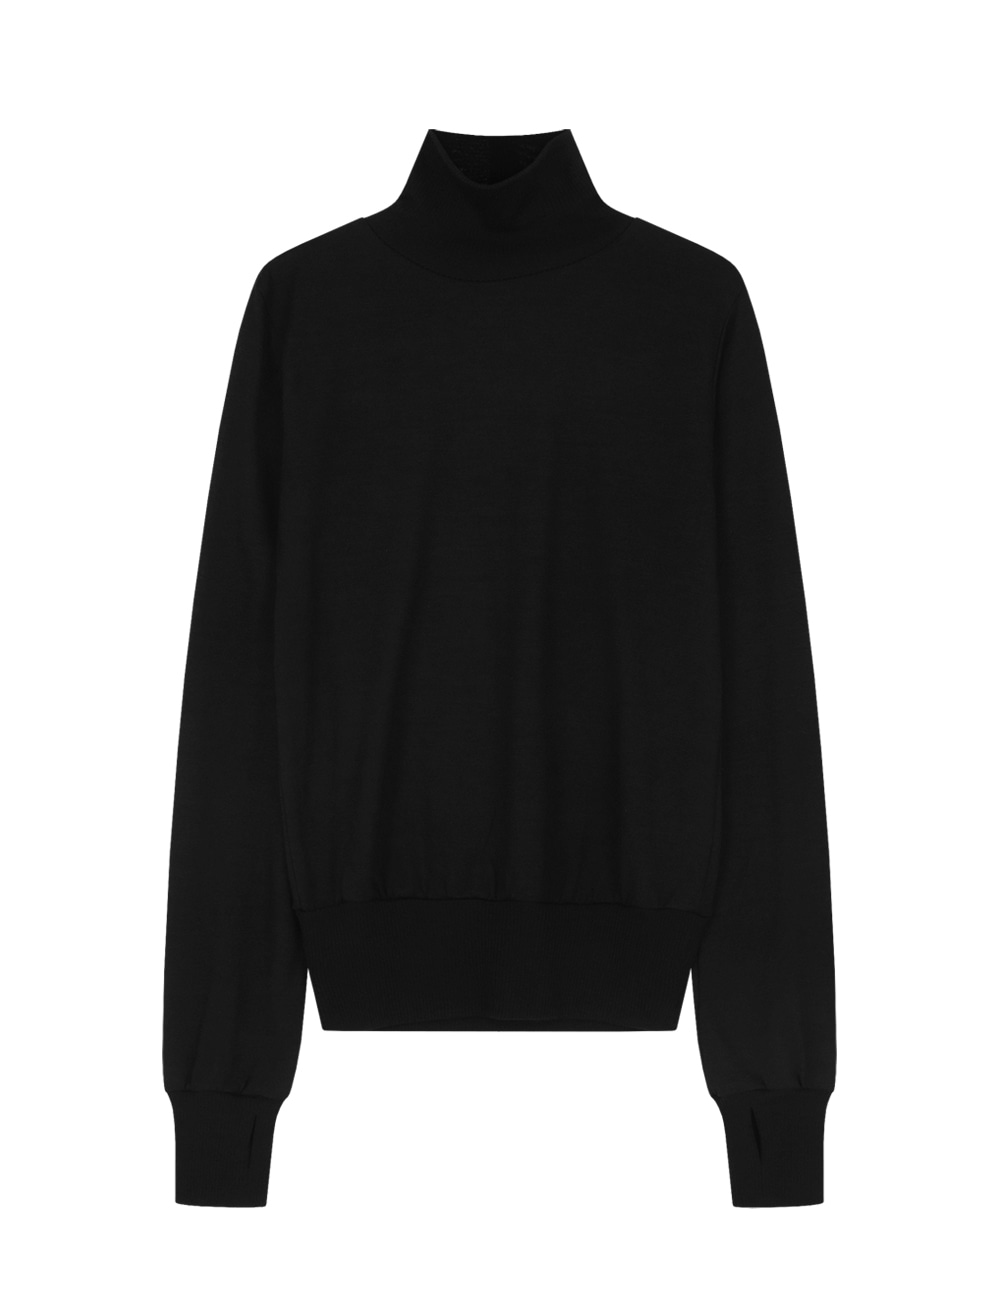 COVER STITCH WOOL JERSEY MOCK NECK TOP (BLACK)